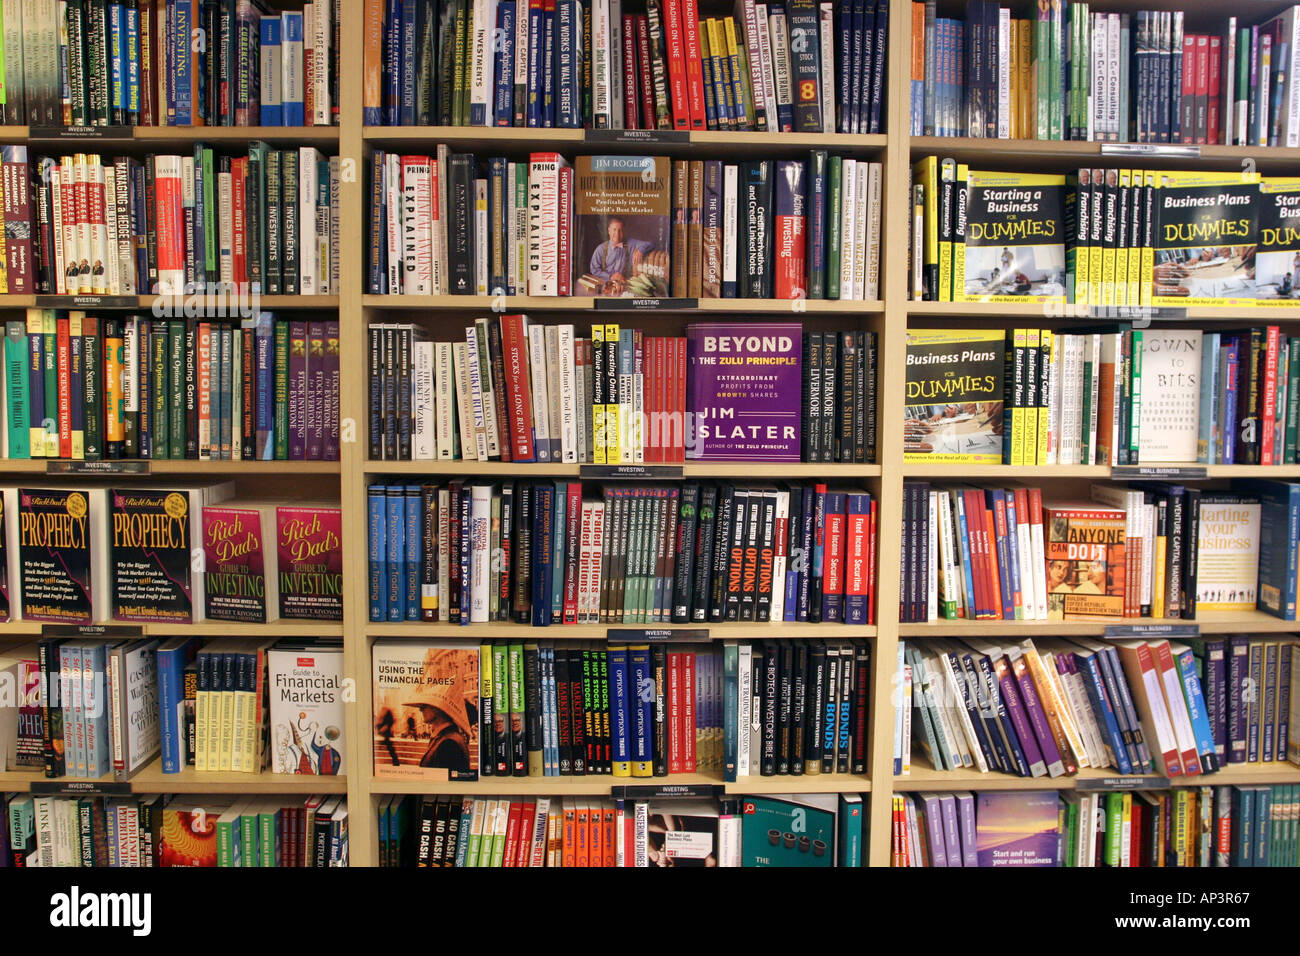 A Large Bookshelf Filled With Books Stock Photo 5114726 Alamy